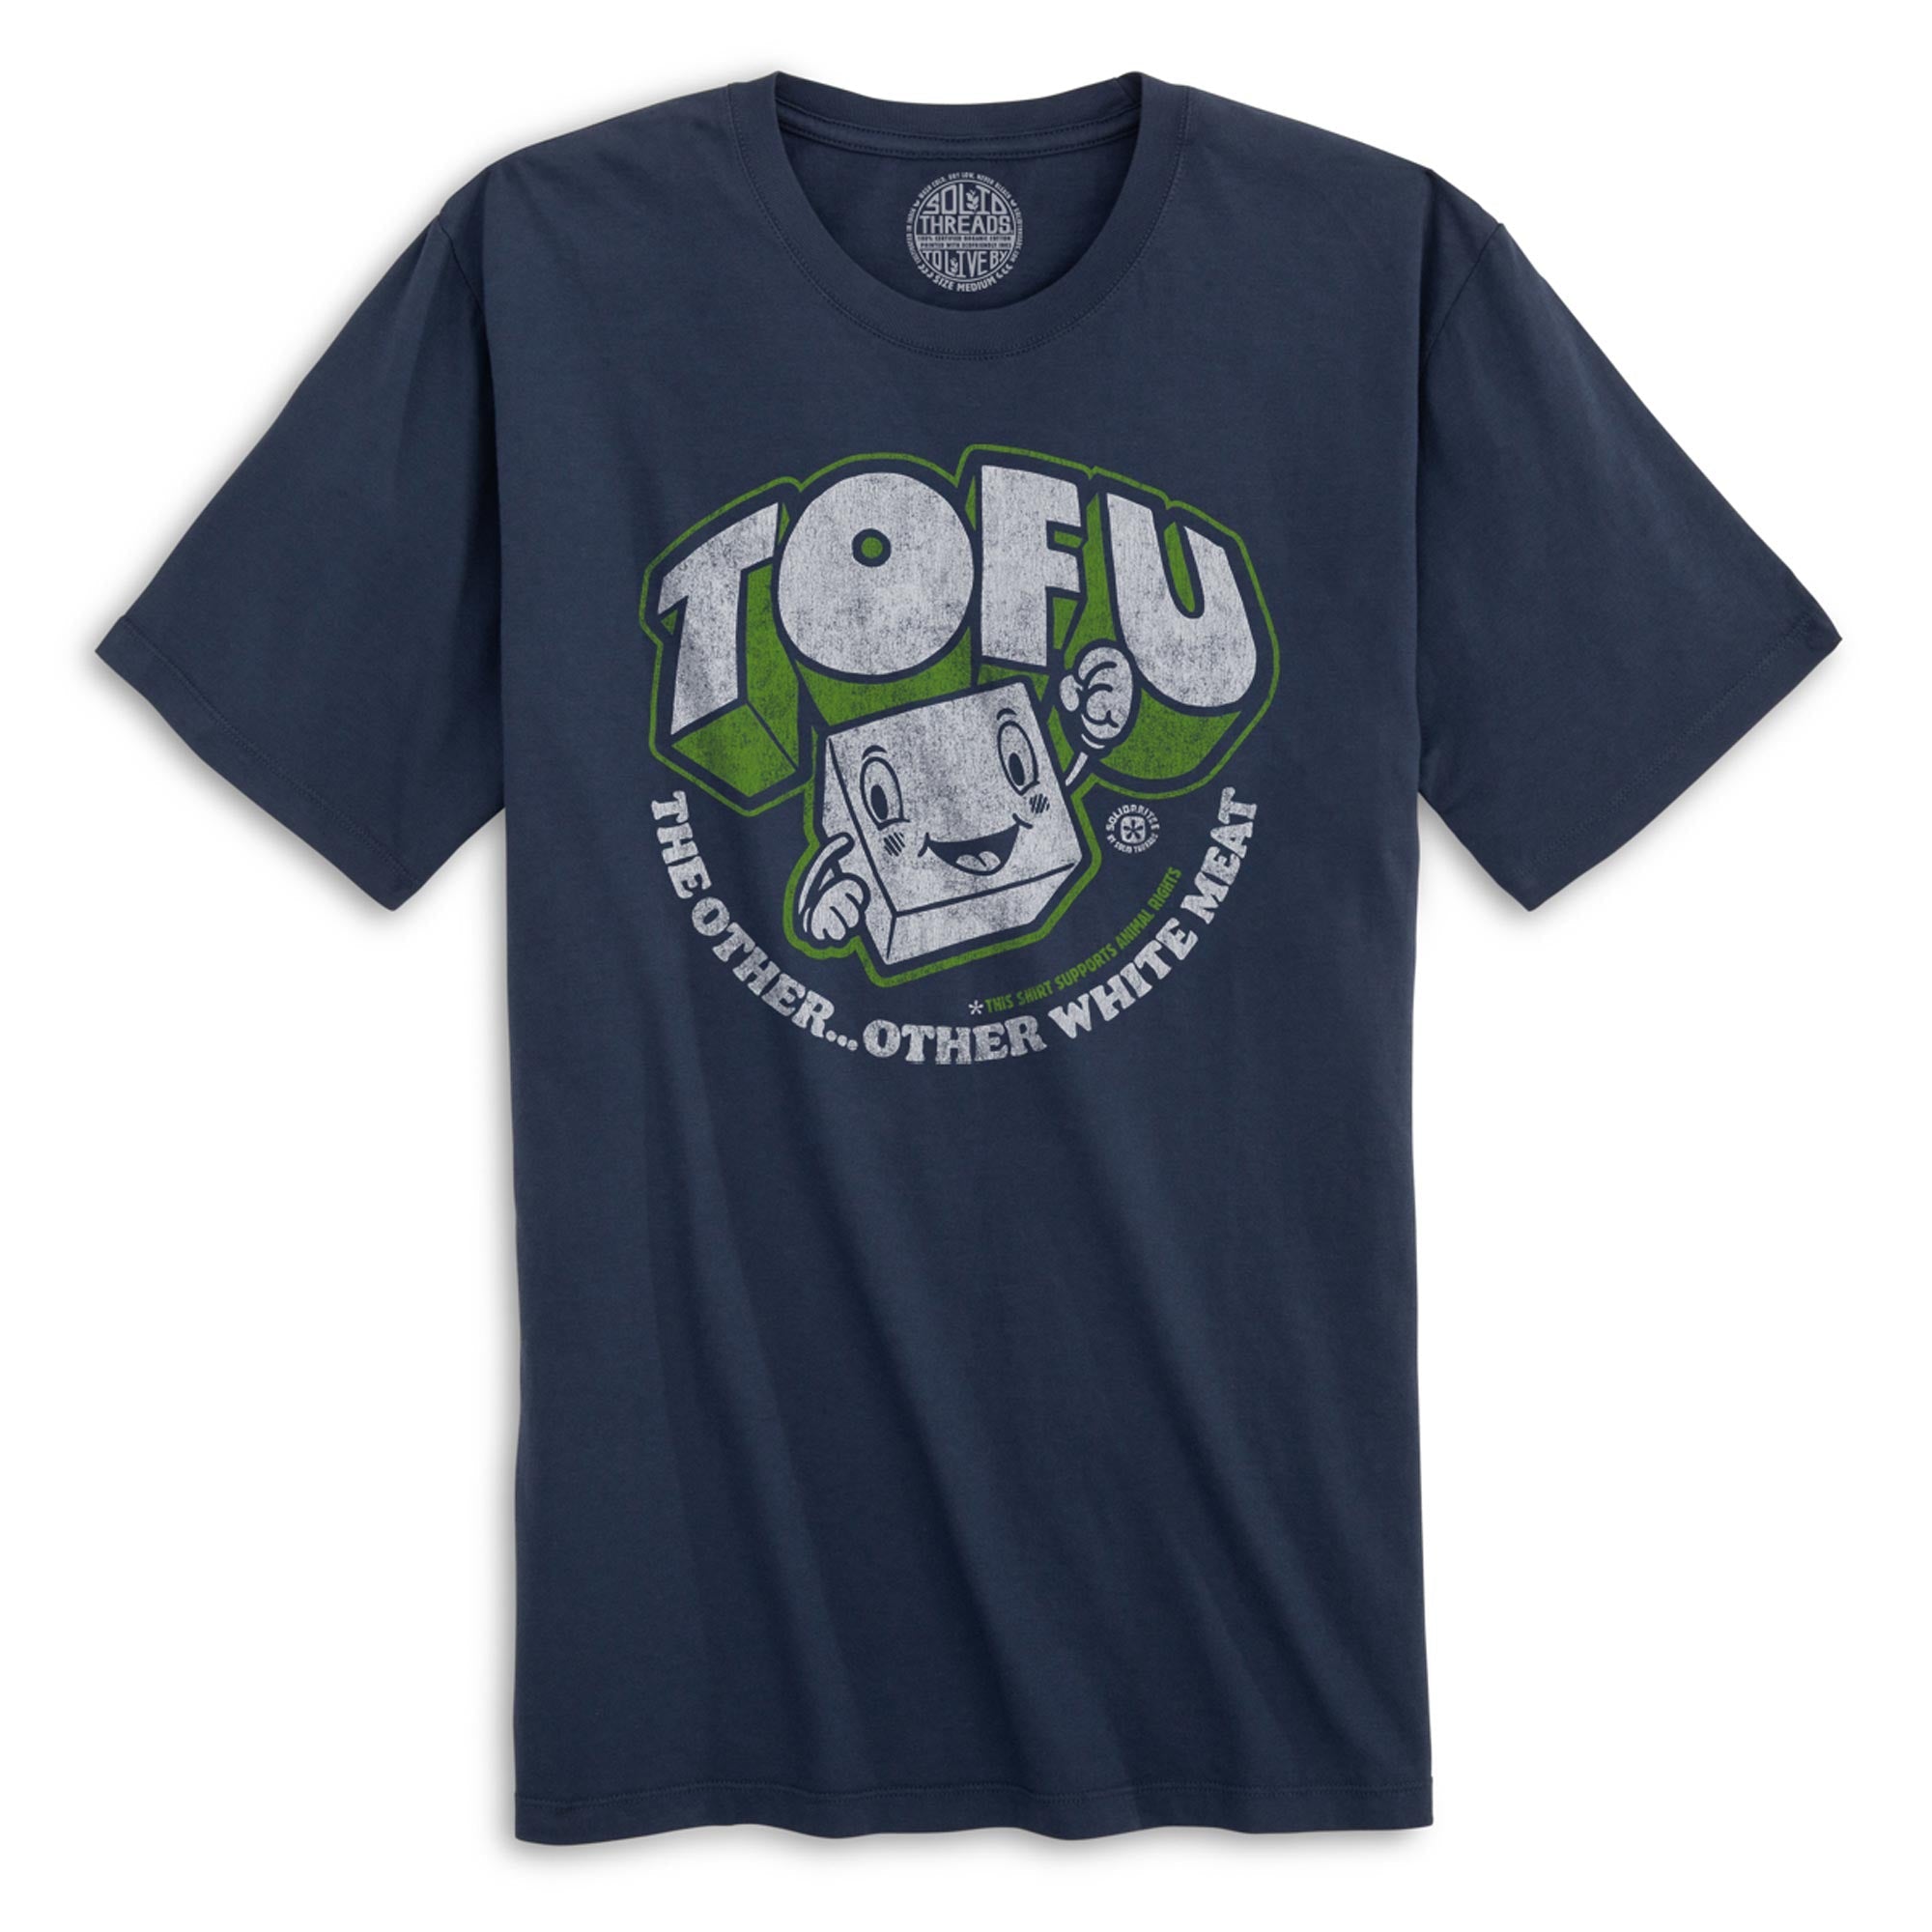 Tofu,The Other Other White Meat | Supports Animal Rights Vintage Organic Cotton T-shirt | Funny Vegan Food  Tee | Solid Threads